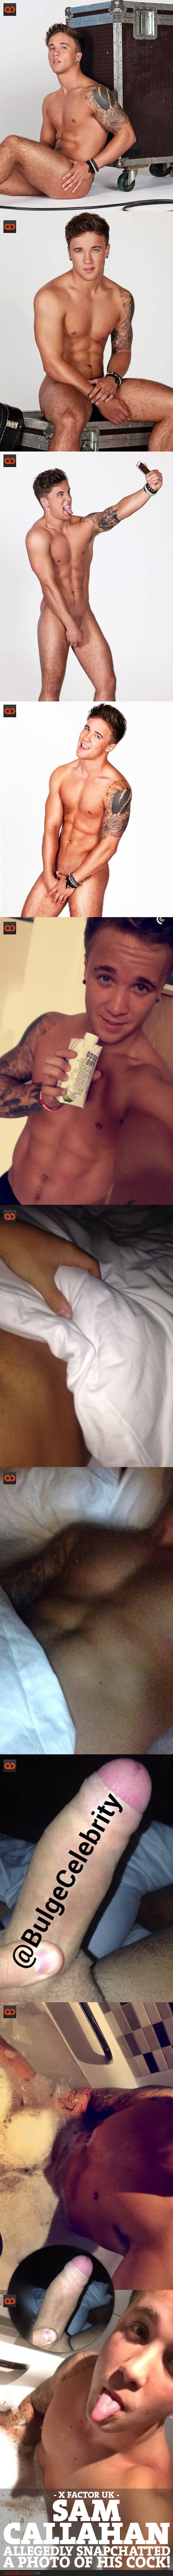 qc-exposed_celeb_sam_callahan_xfactor_alleged_snapchat_cock_photo-collage04